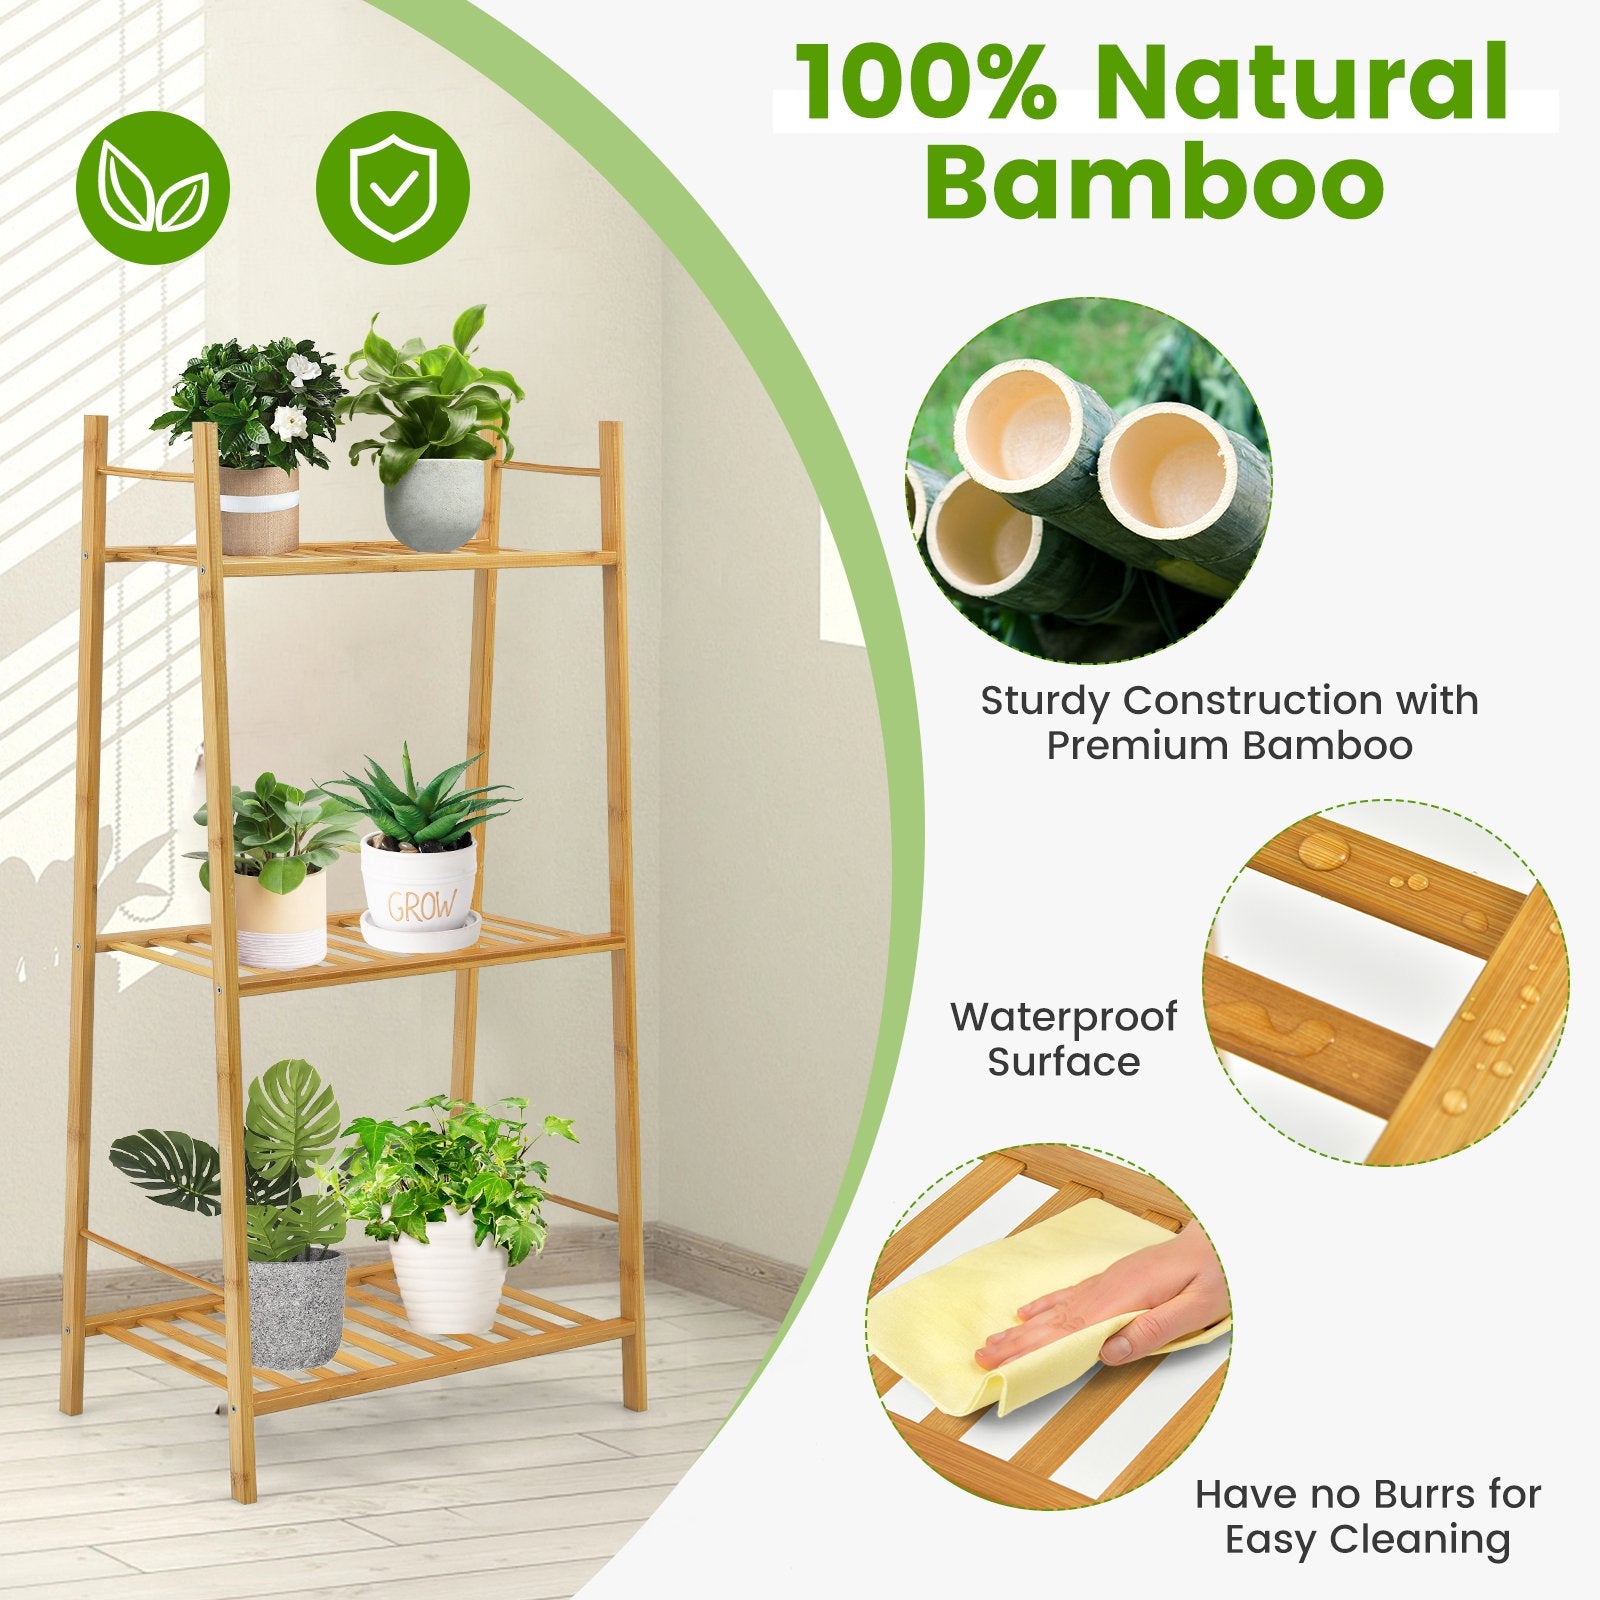 3 Tiers Vertical Bamboo Plant Stand, Natural - Gallery Canada